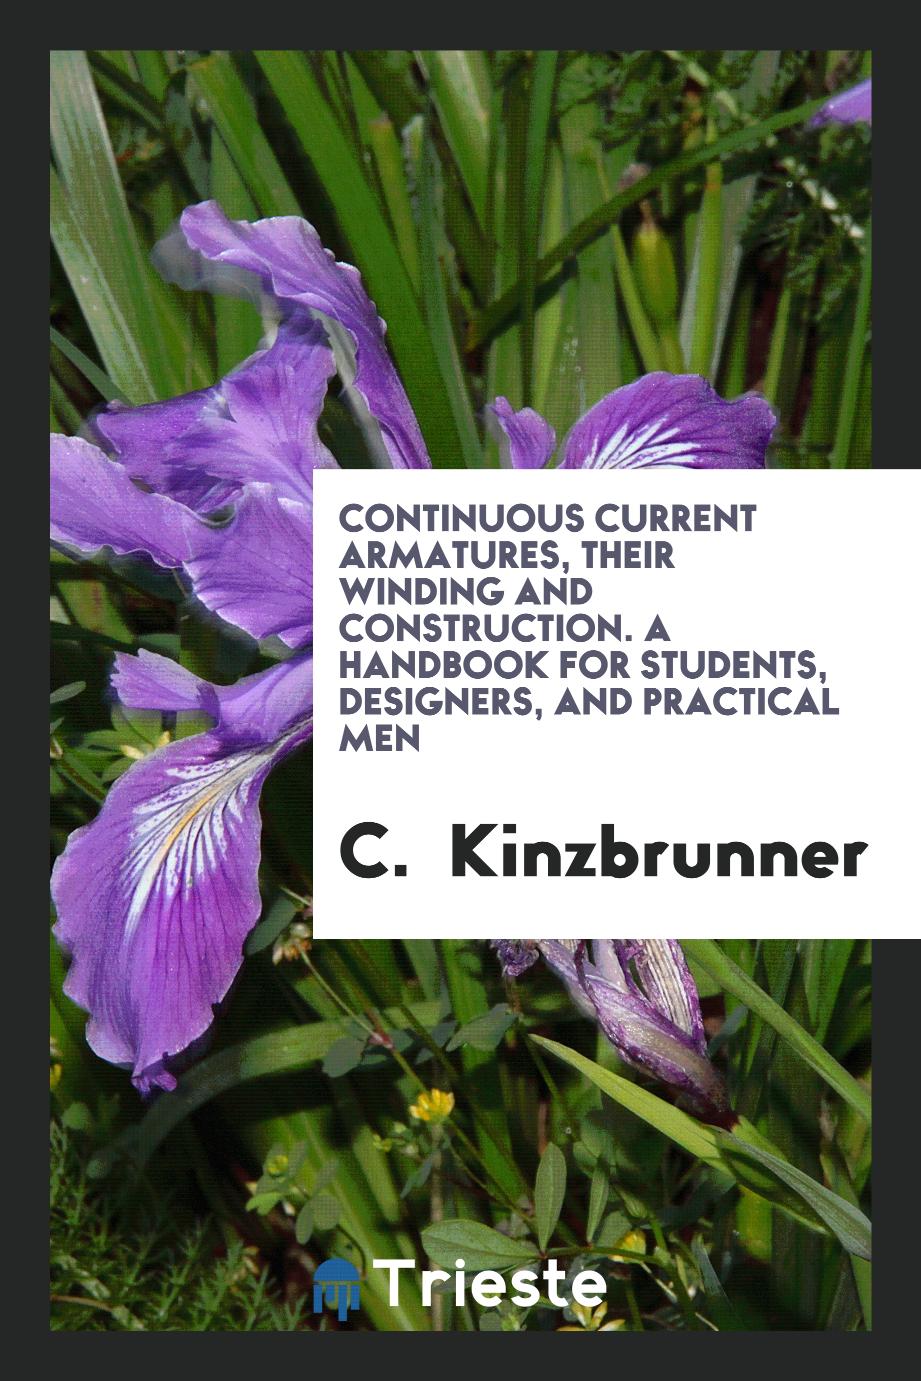 Continuous Current Armatures, Their Winding and Construction. A Handbook for Students, Designers, and Practical Men